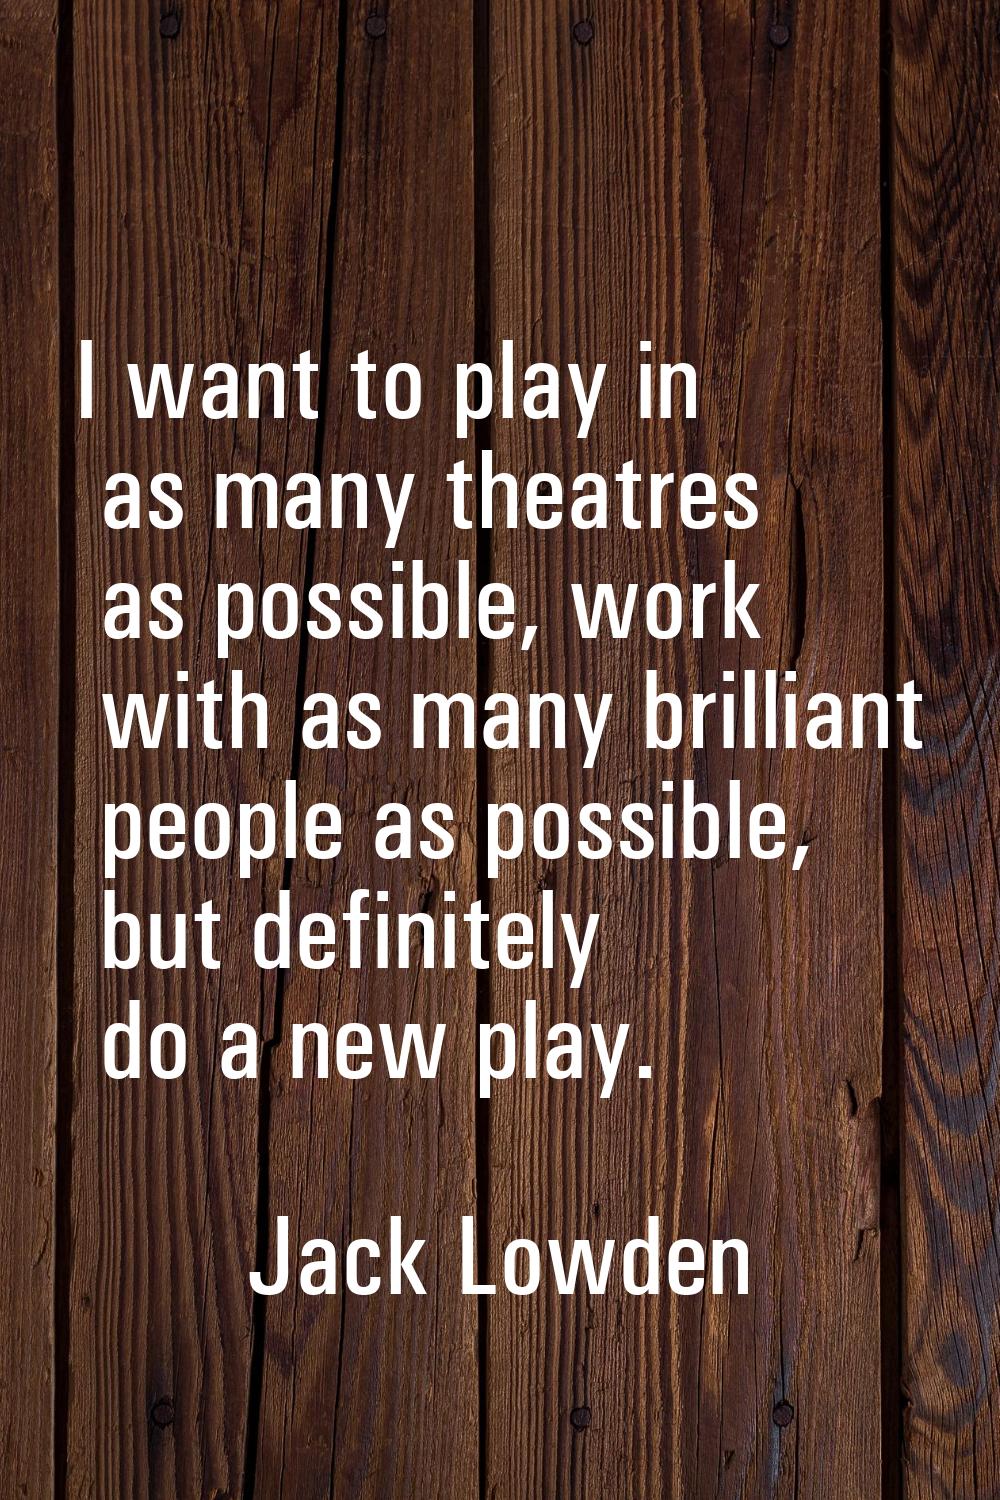 I want to play in as many theatres as possible, work with as many brilliant people as possible, but